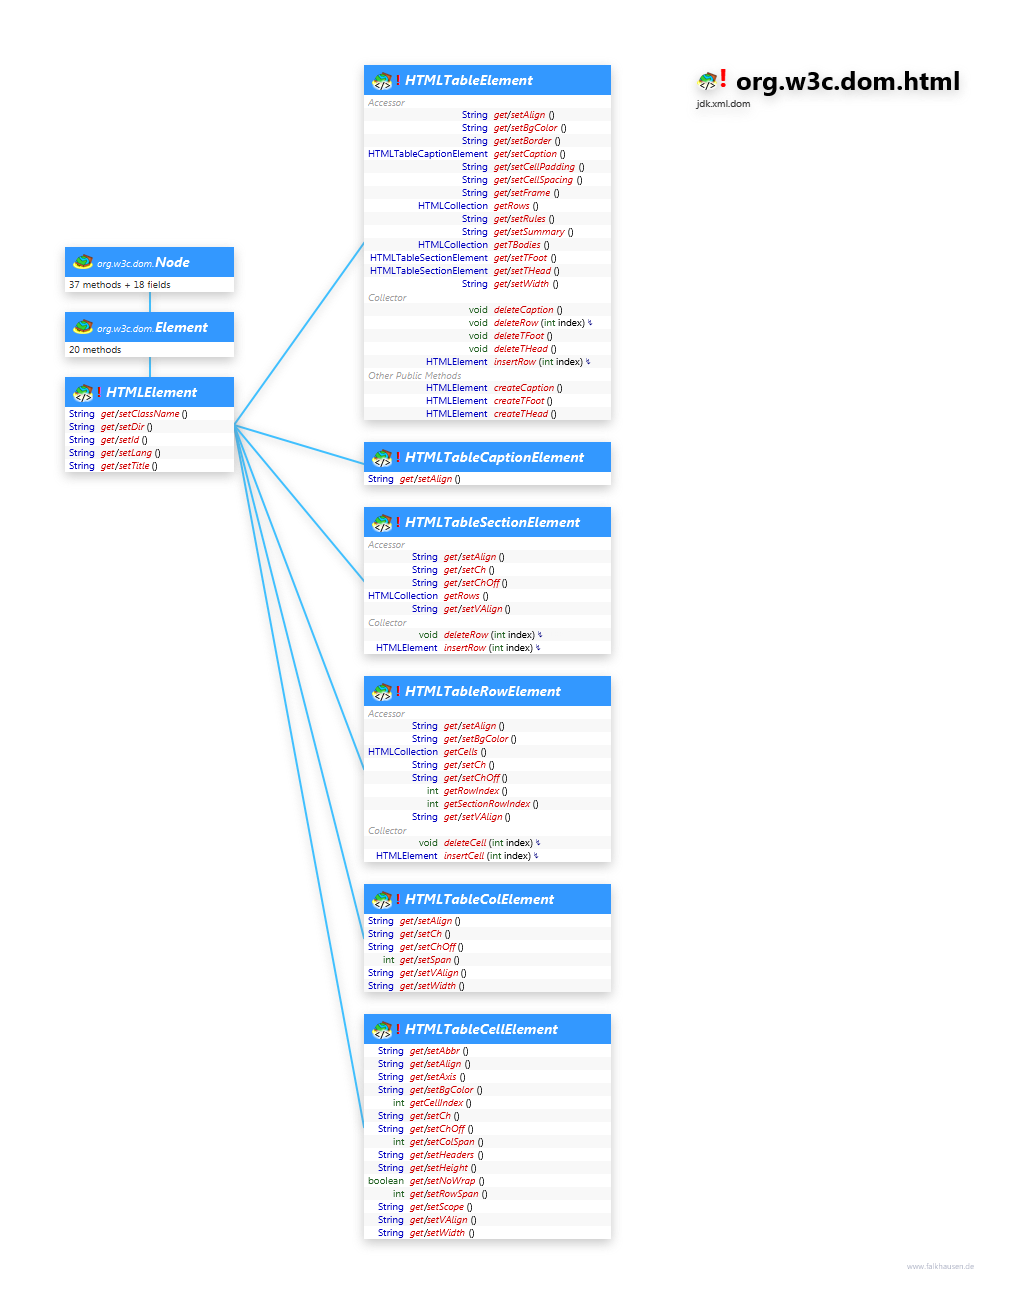 org.w3c.dom.html Table Elements class diagram and api documentation for Java 10